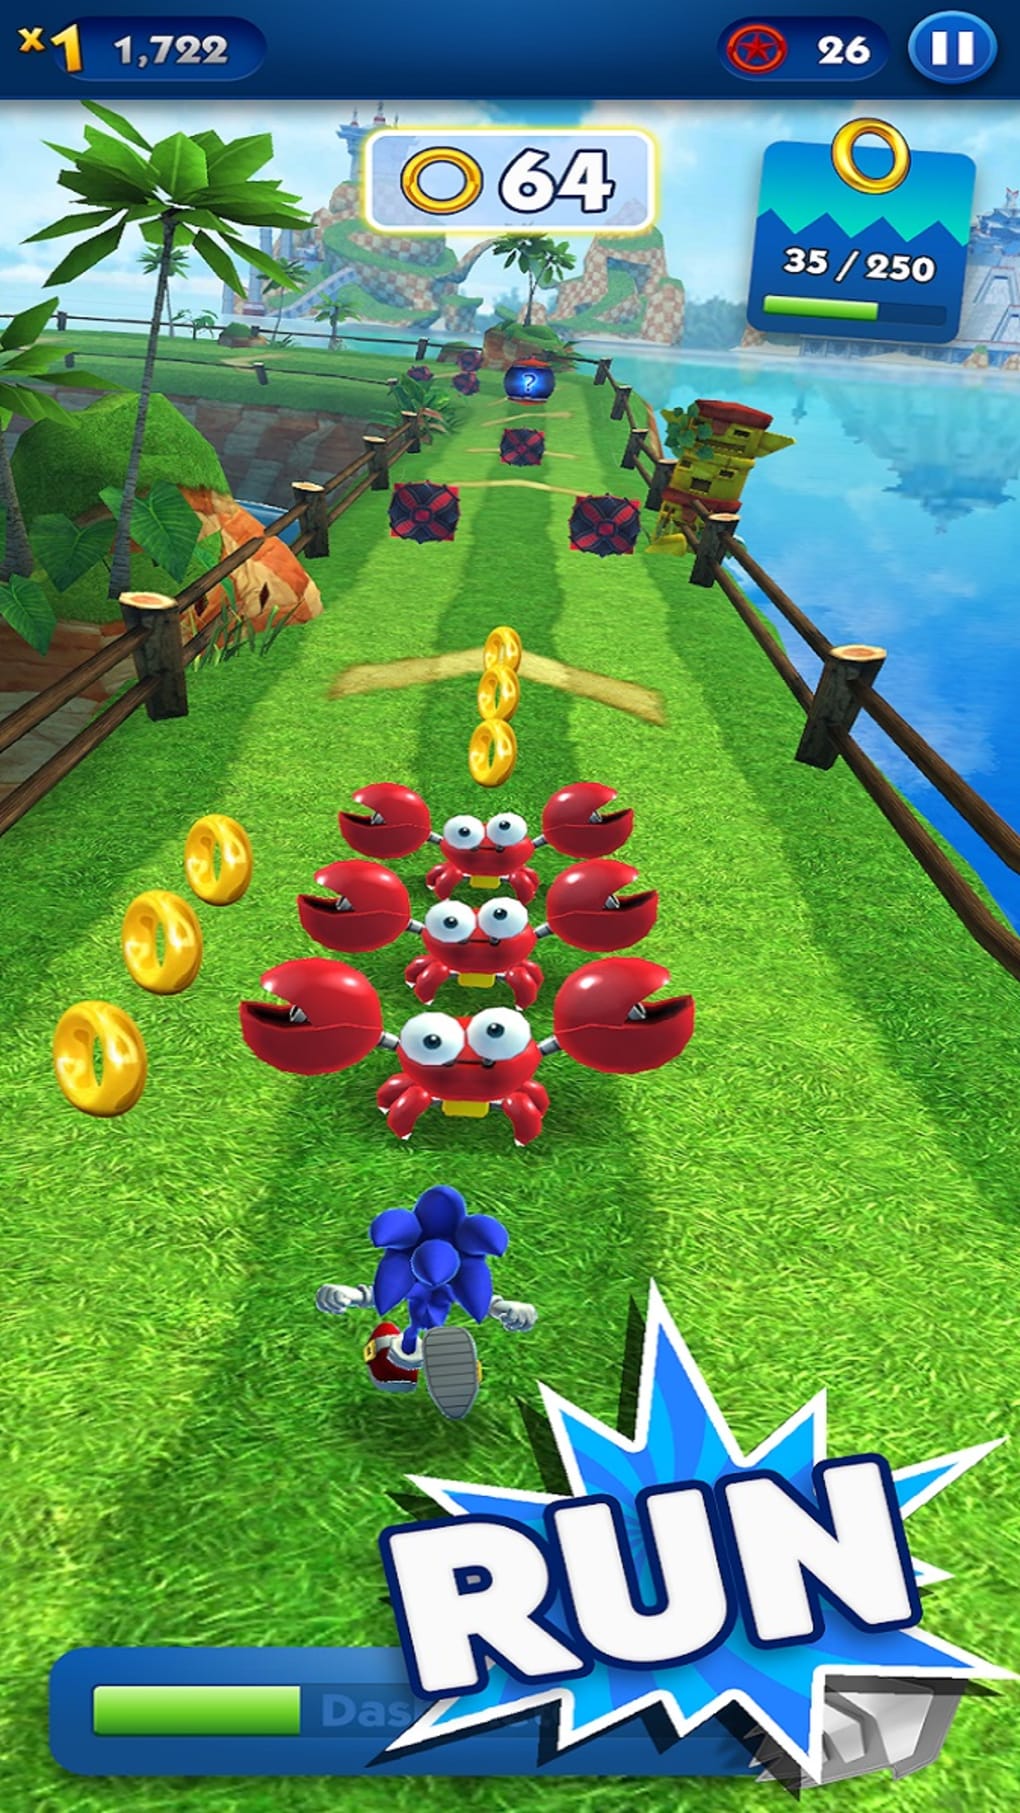 These are characters in Sonic Dash